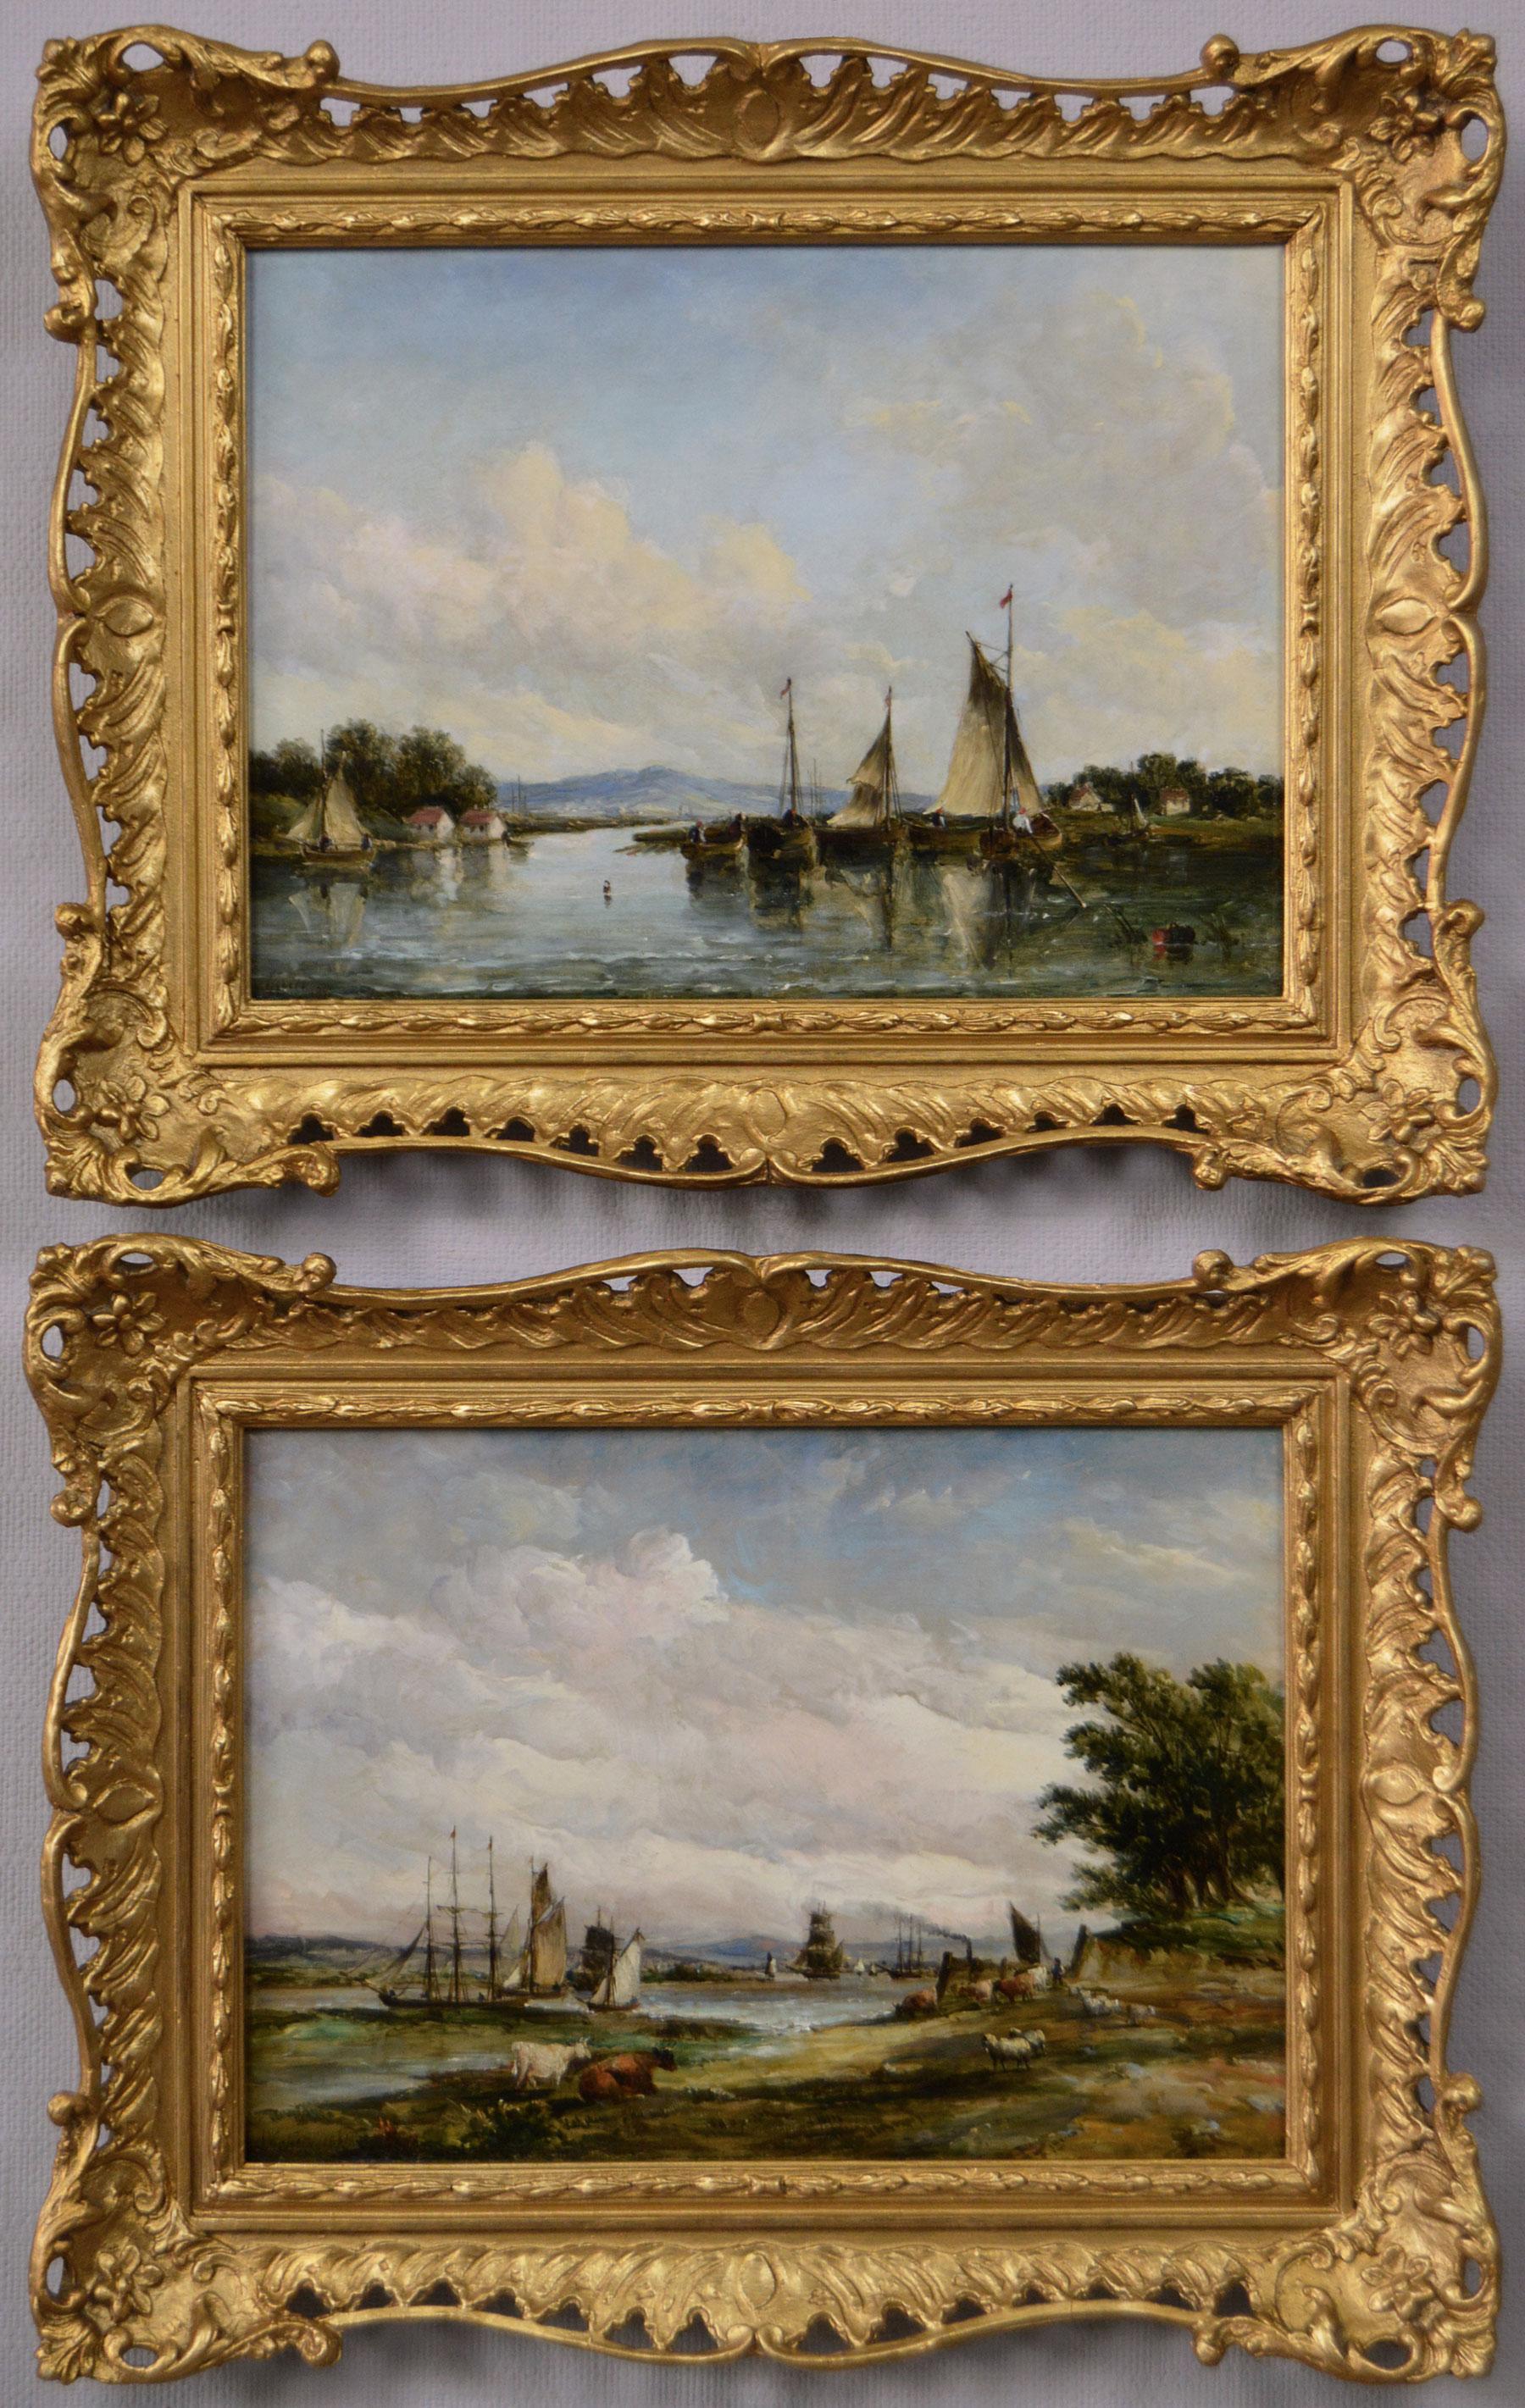 Alfred Vickers Landscape Painting - Pair of 19th Century riverscape oil paintings of ships on the Thames in Kent